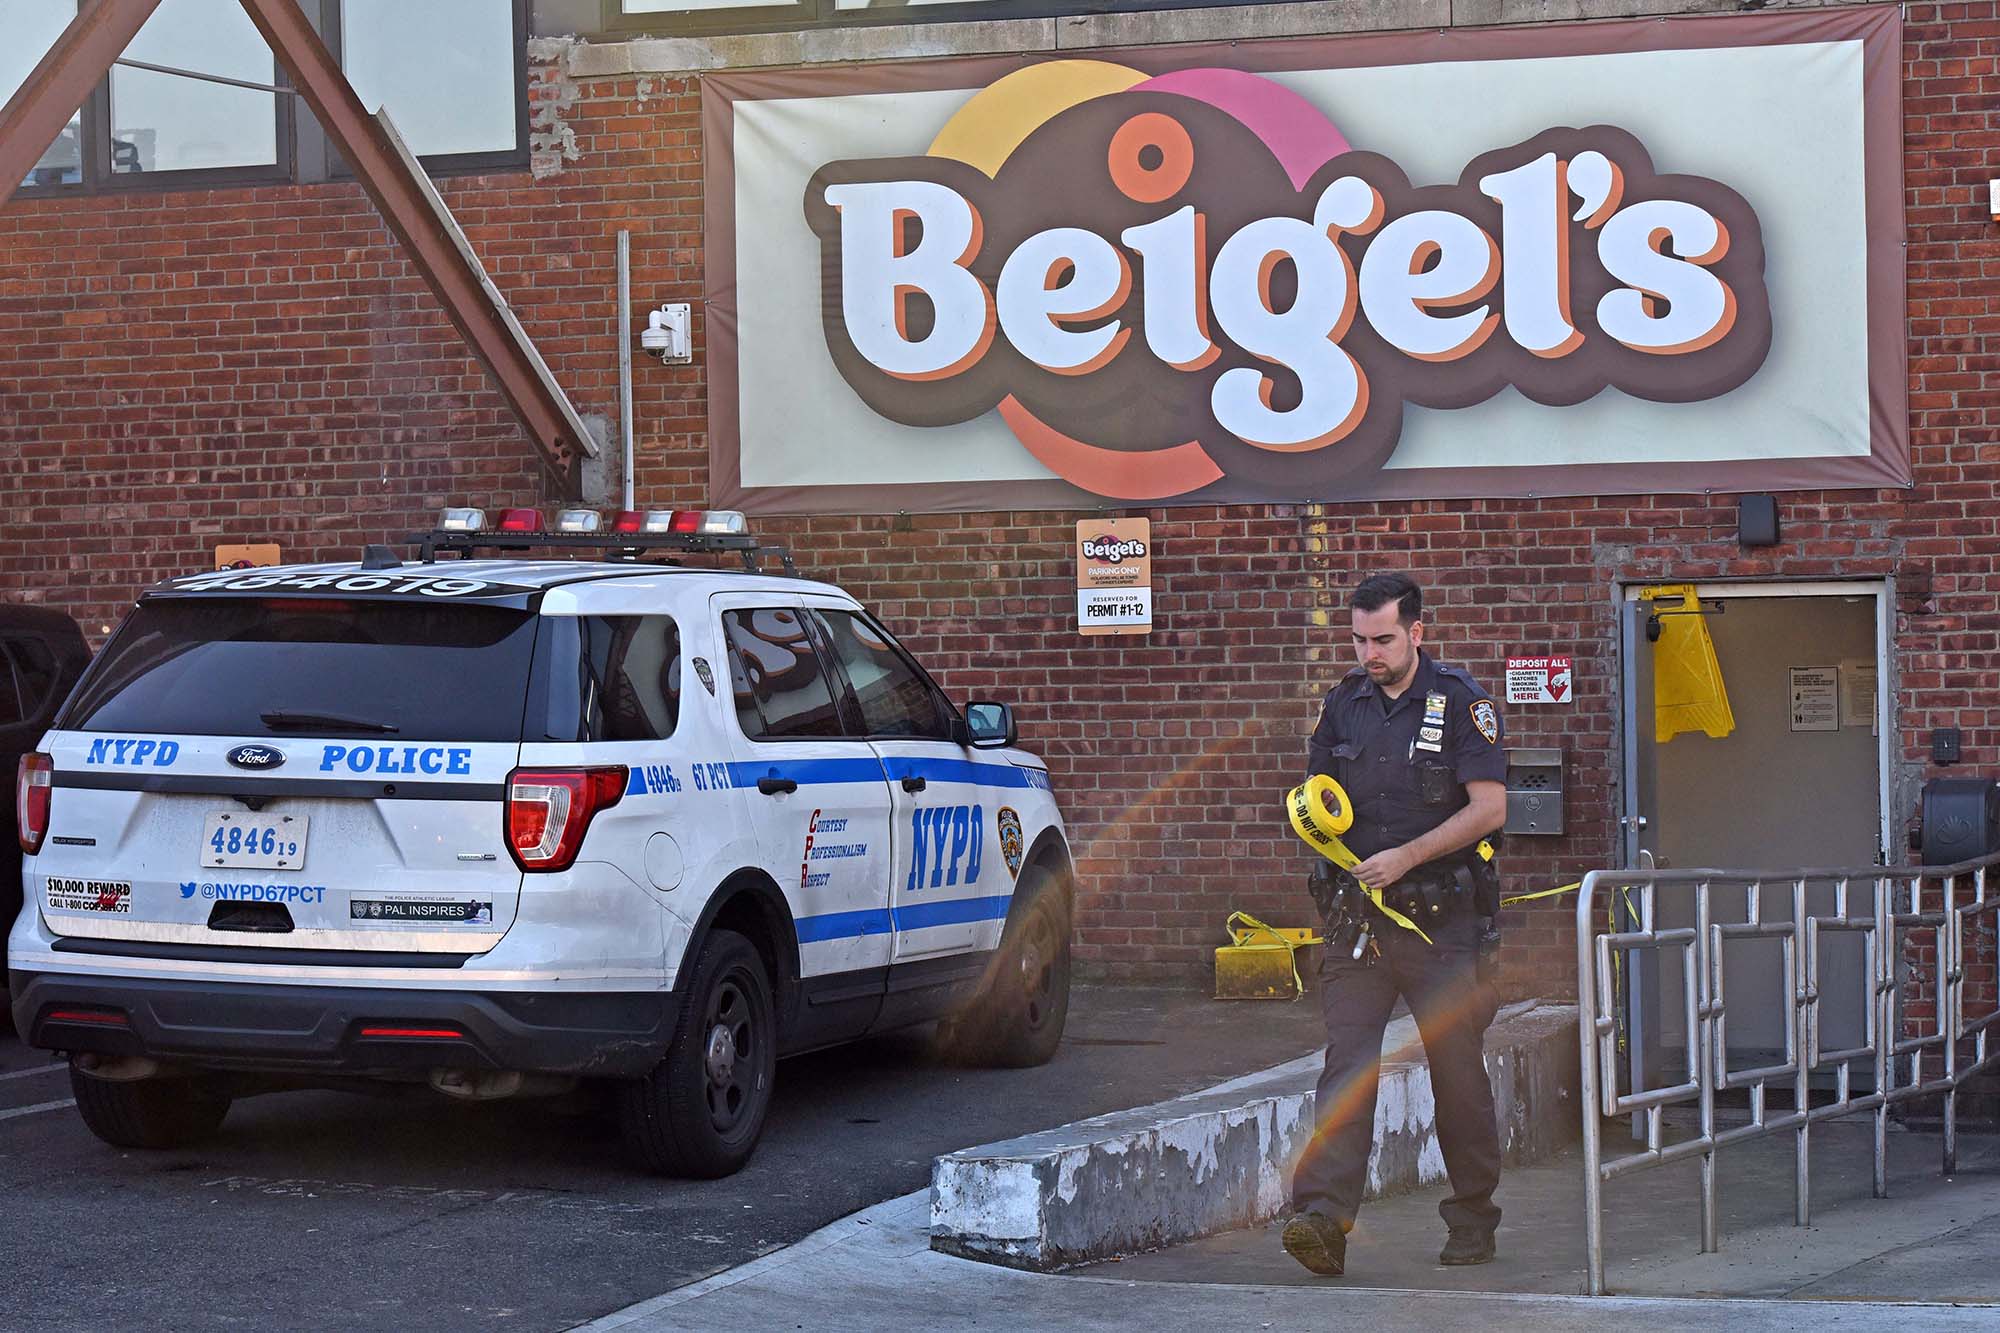 Worker’s body found inside walk-in freezer at bakery manufacturing facility in East Flatbush